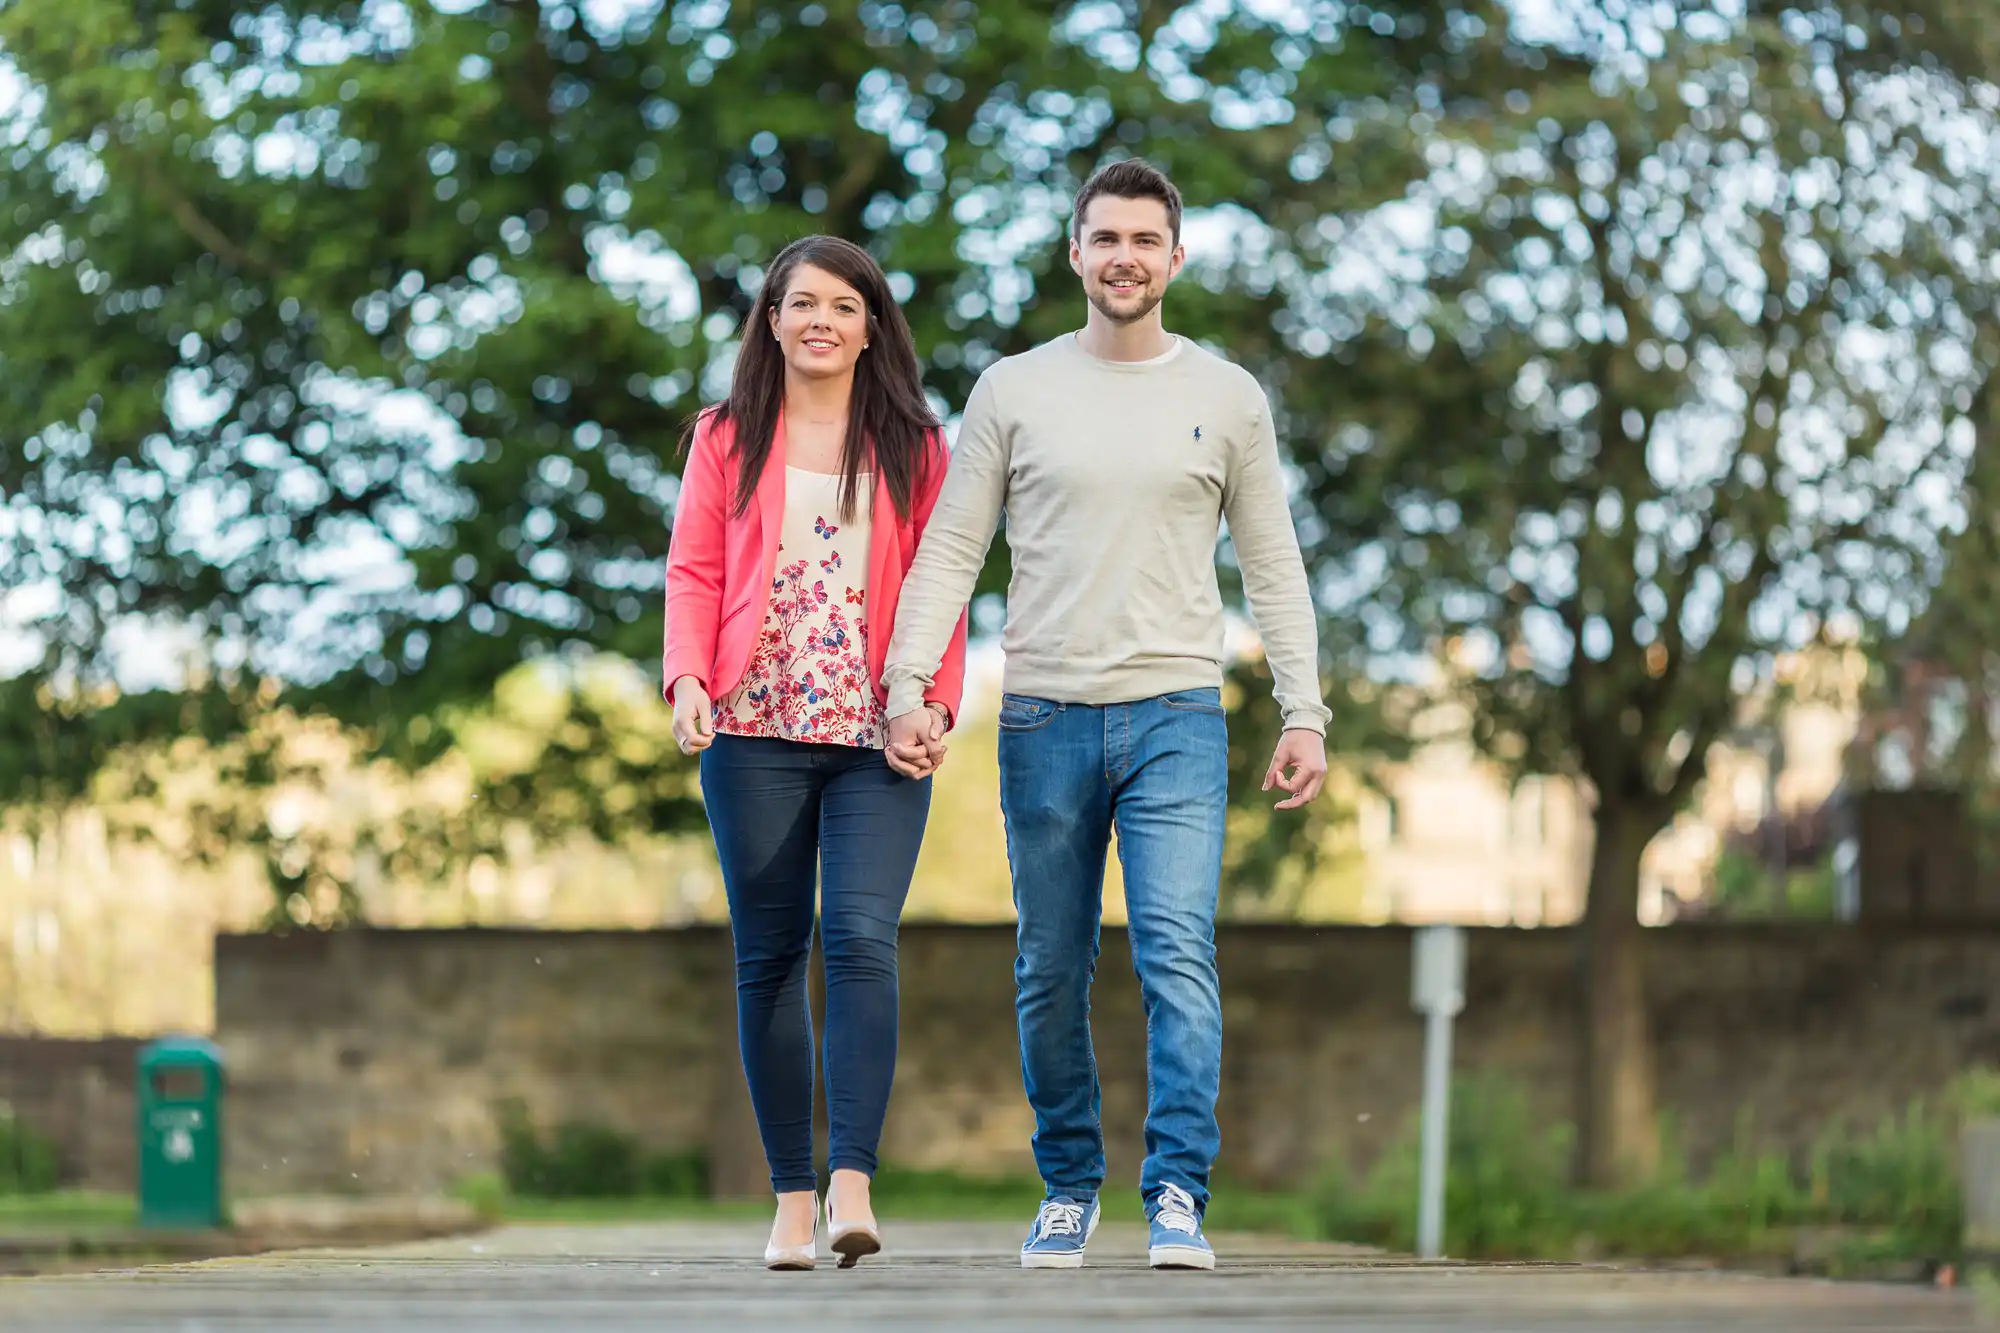 A young couple happily holding hands while walking on a paved path in a park, smiling at the camera.